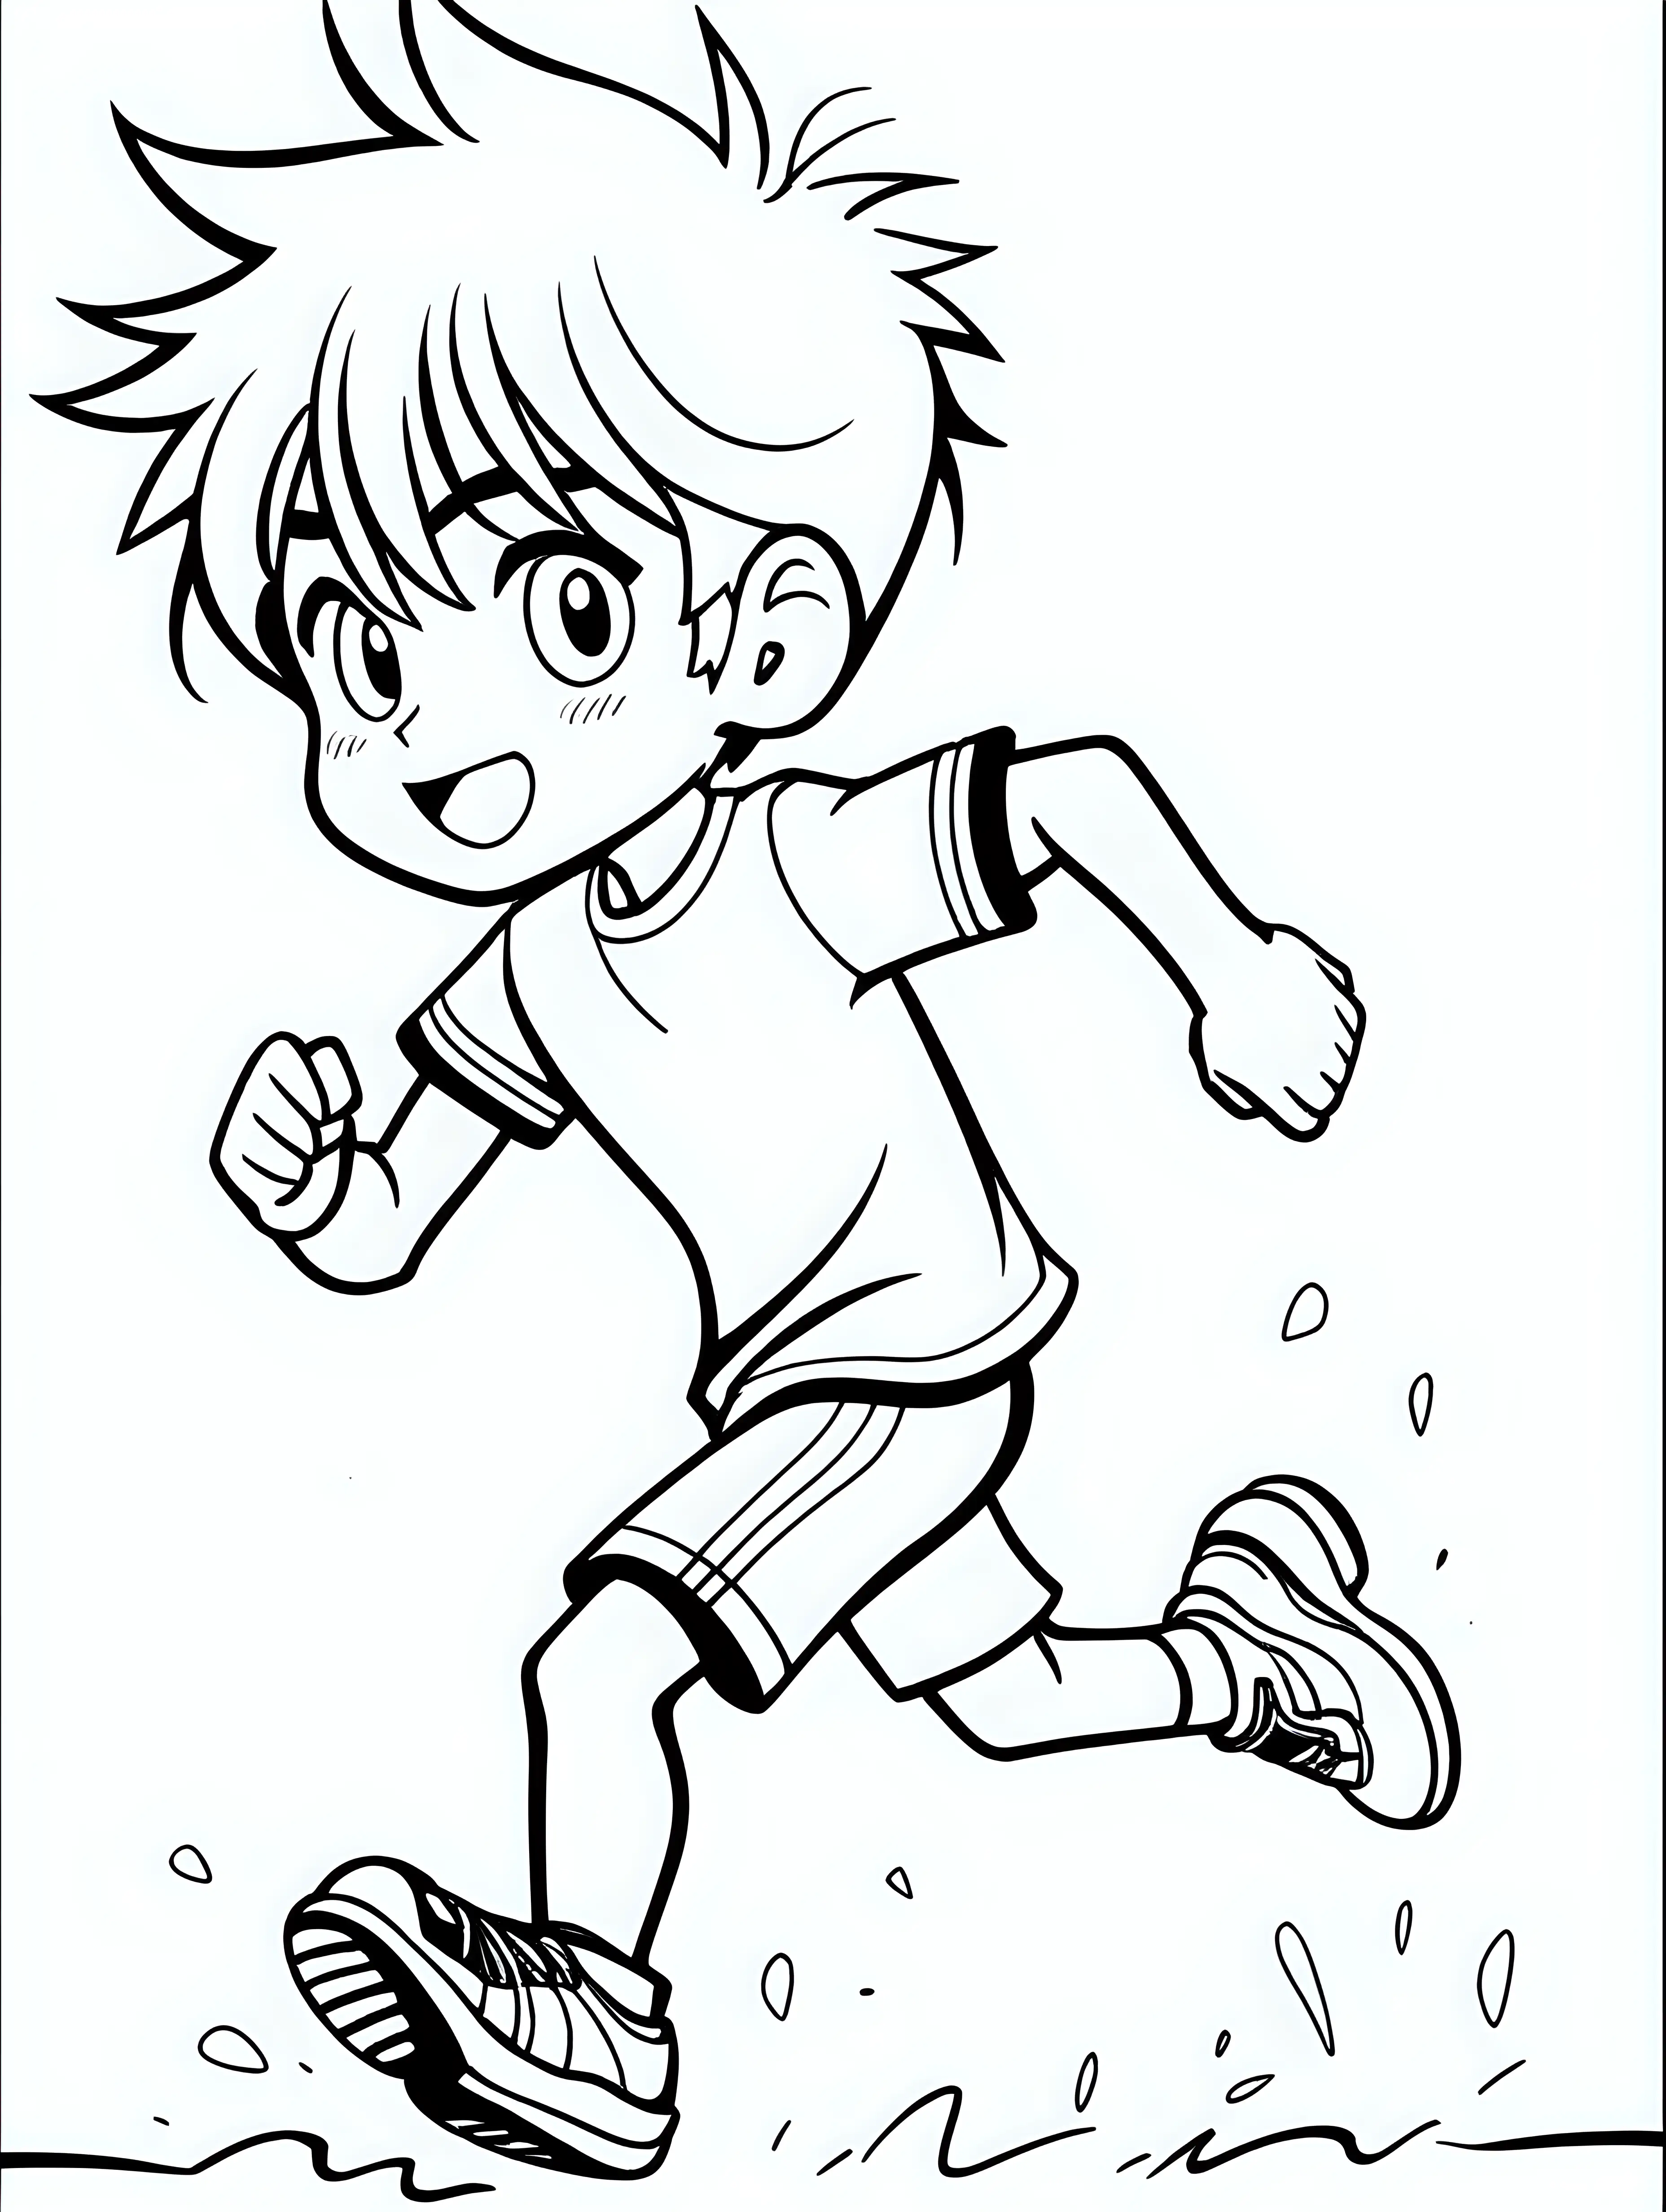 Coloring page for kids, cute manga boy running, black pages white background 